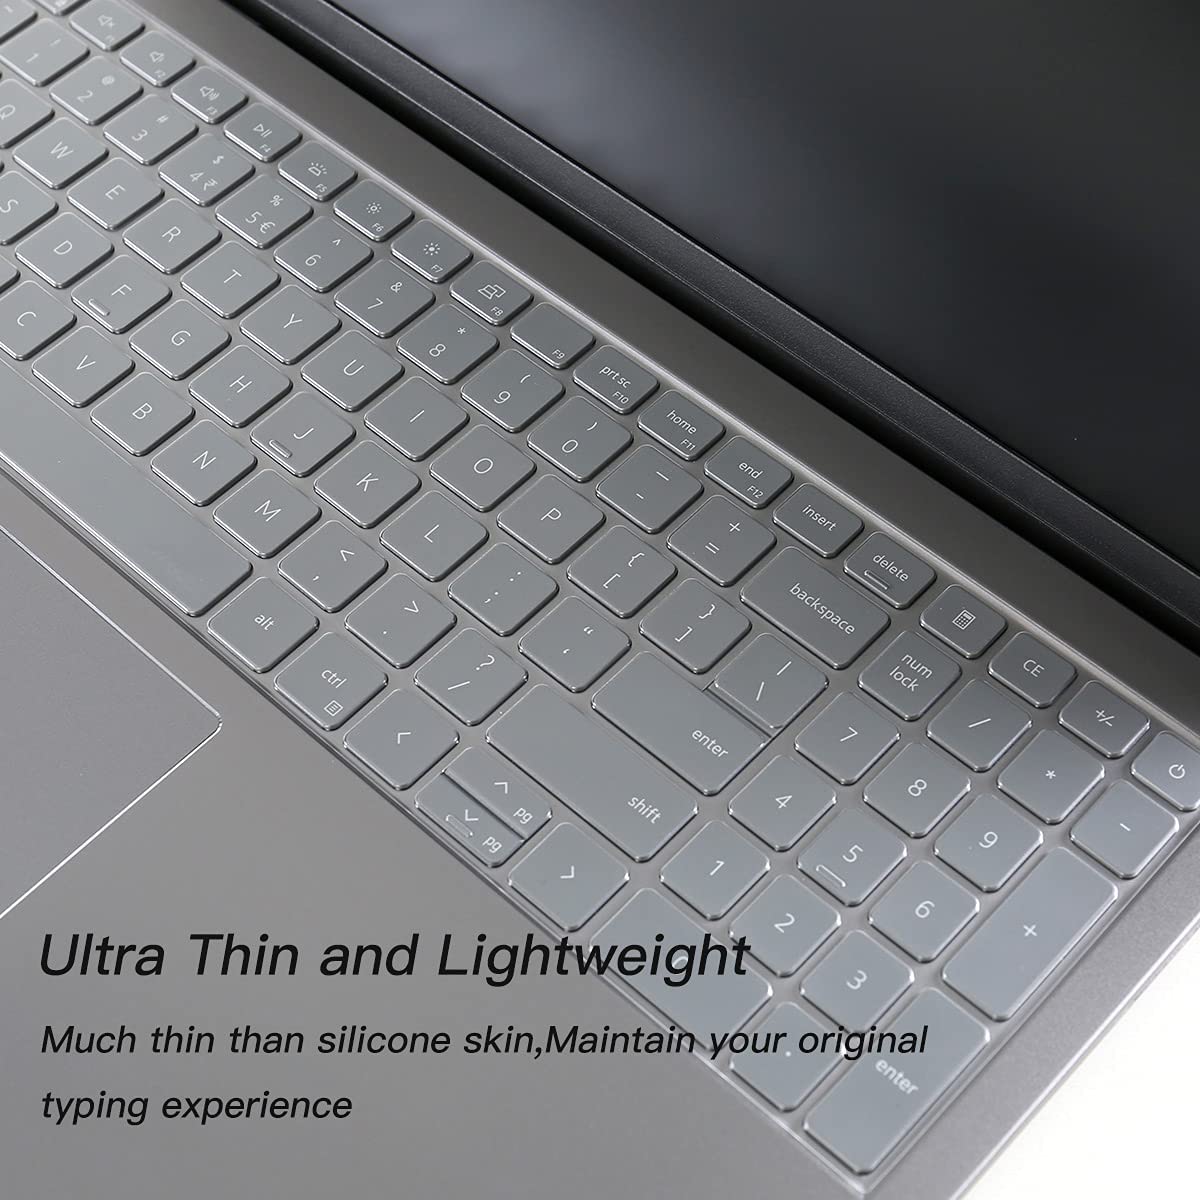 TPU Keyboard Skin Cover for Dell Inspiron 16 plus 7610 Latitude 3520 15.6